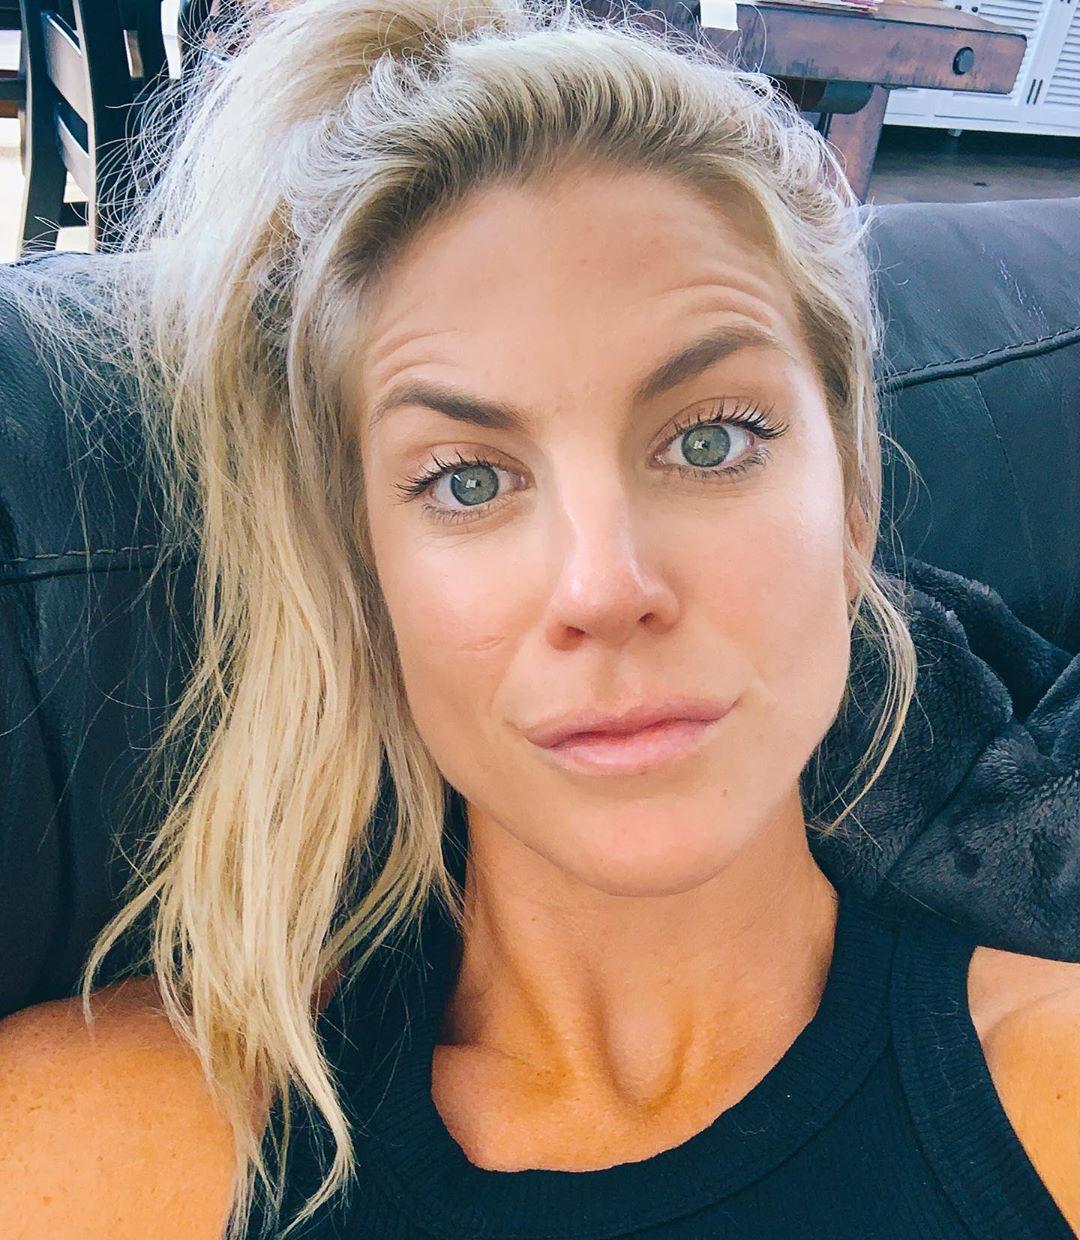 70+ Hot Pictures Of Julie Ertz Will Drive You Nuts For Her 15